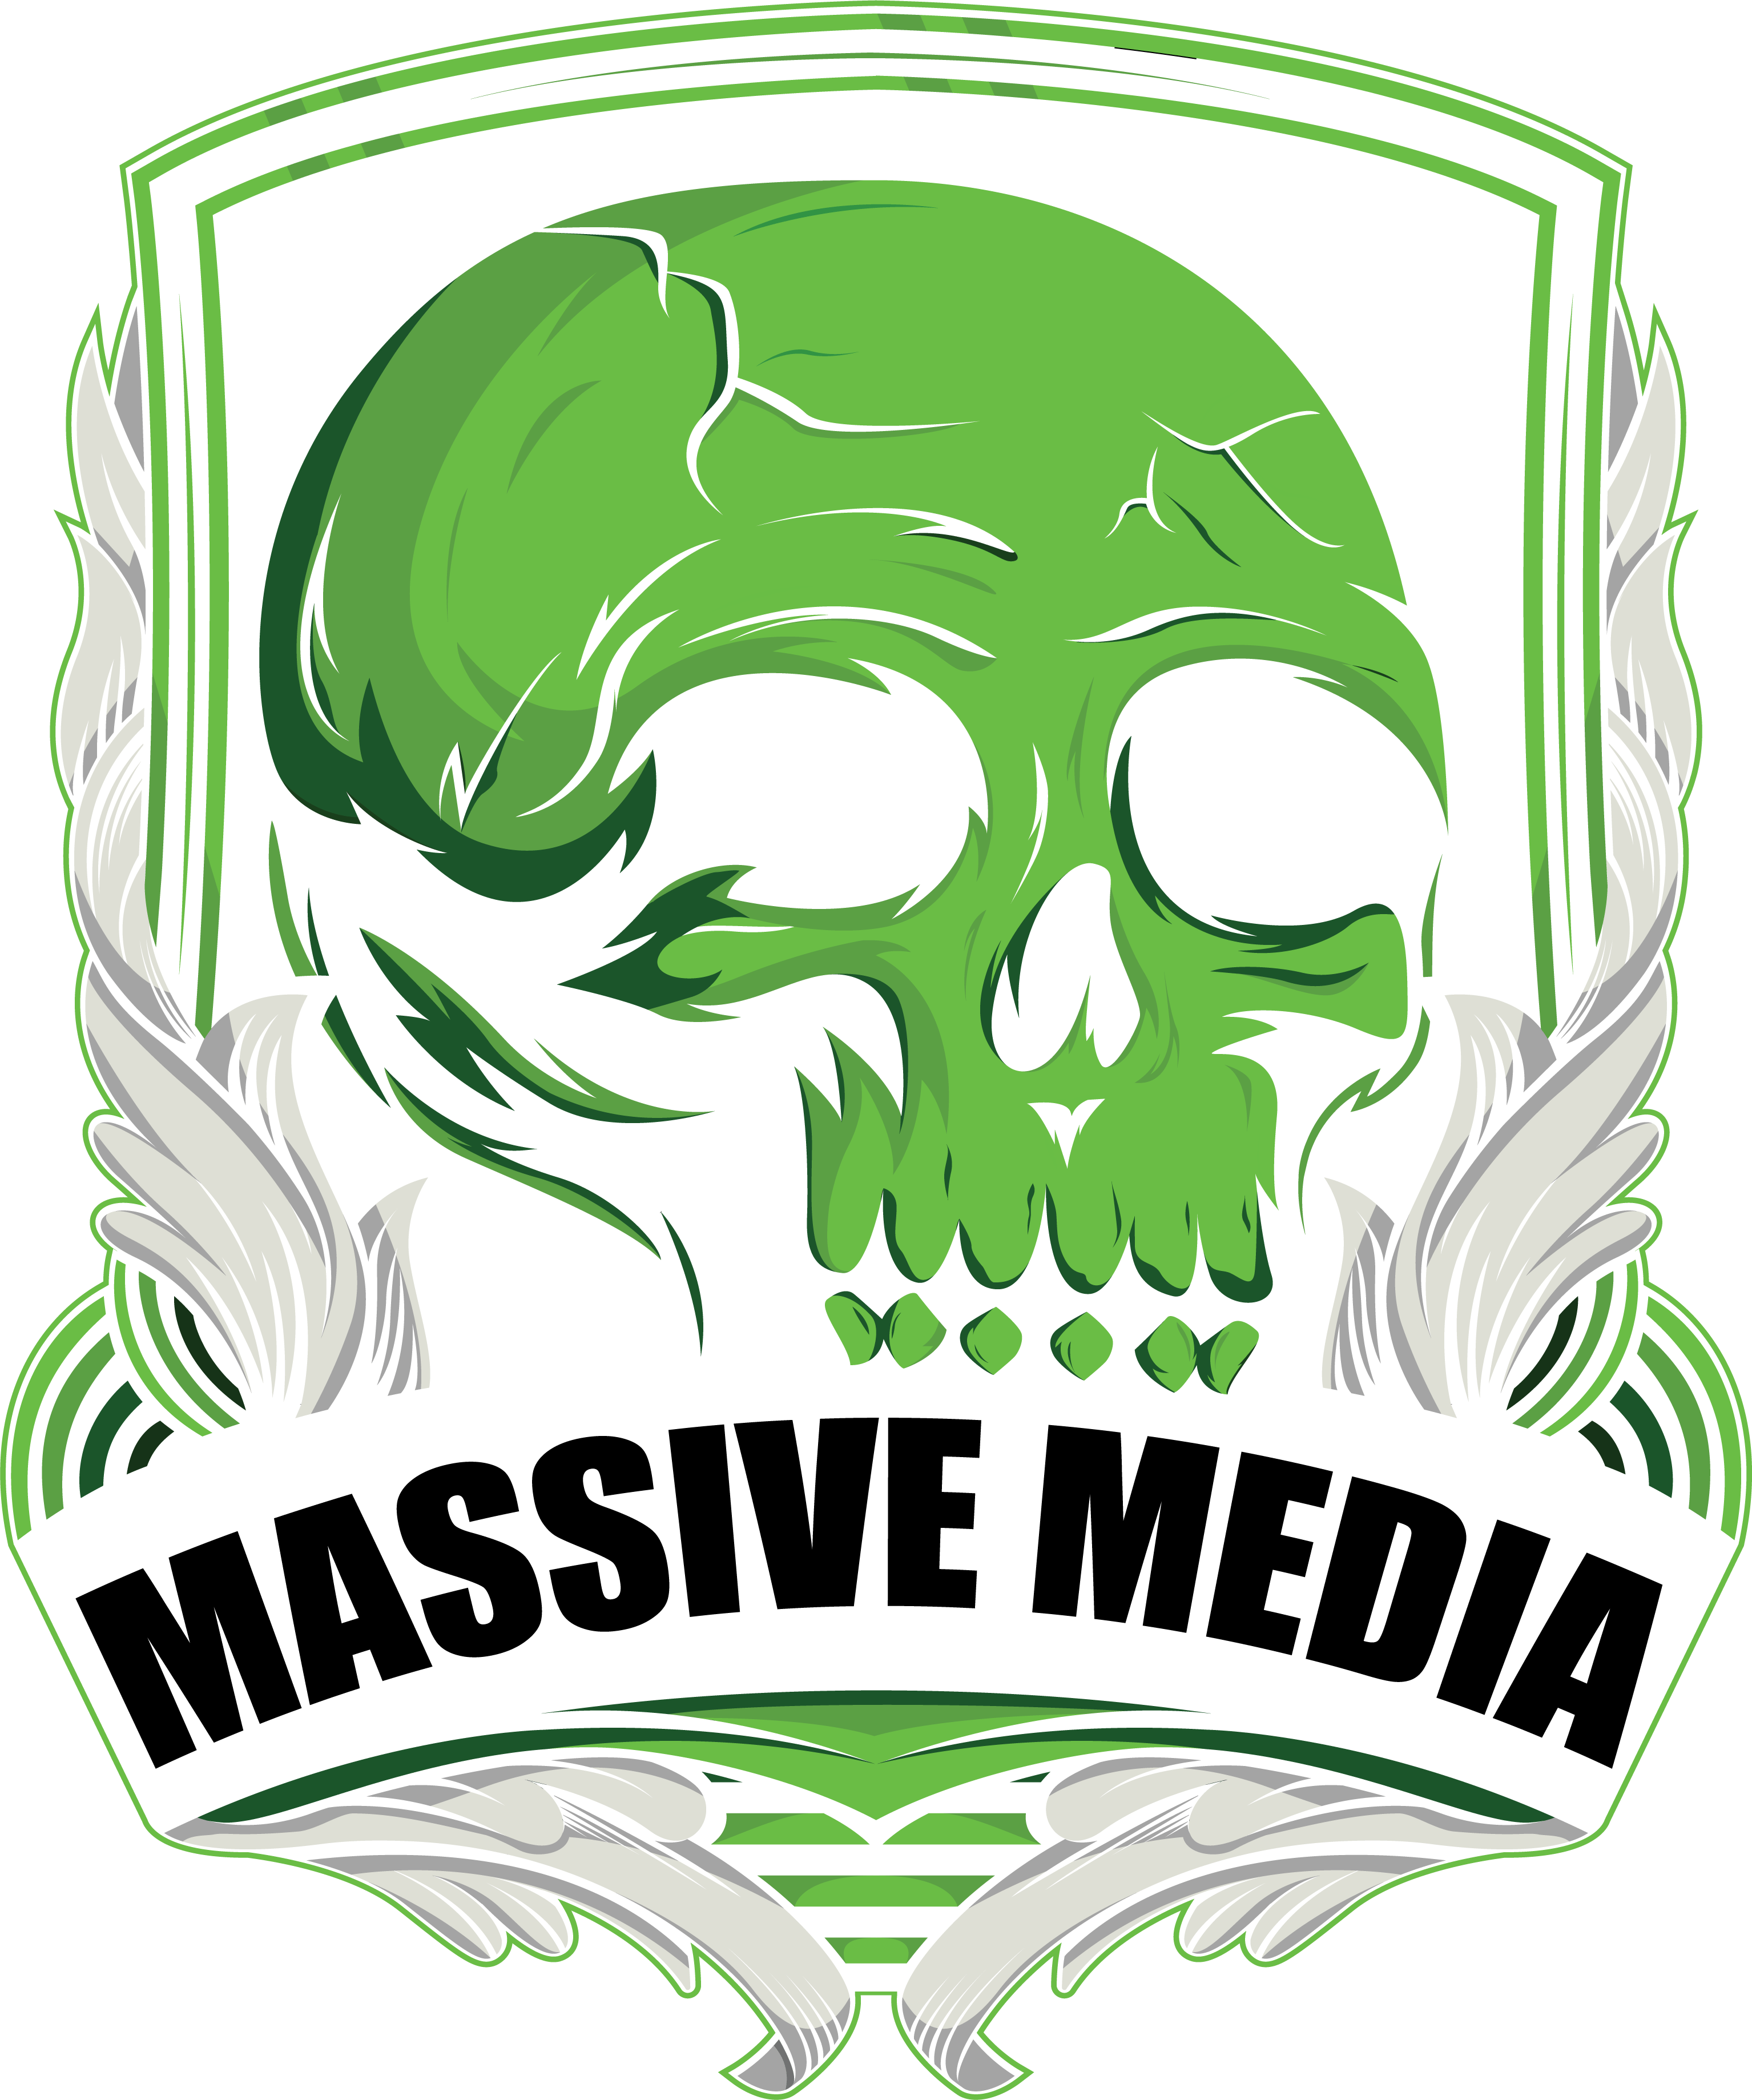 Partnering with Massive Media